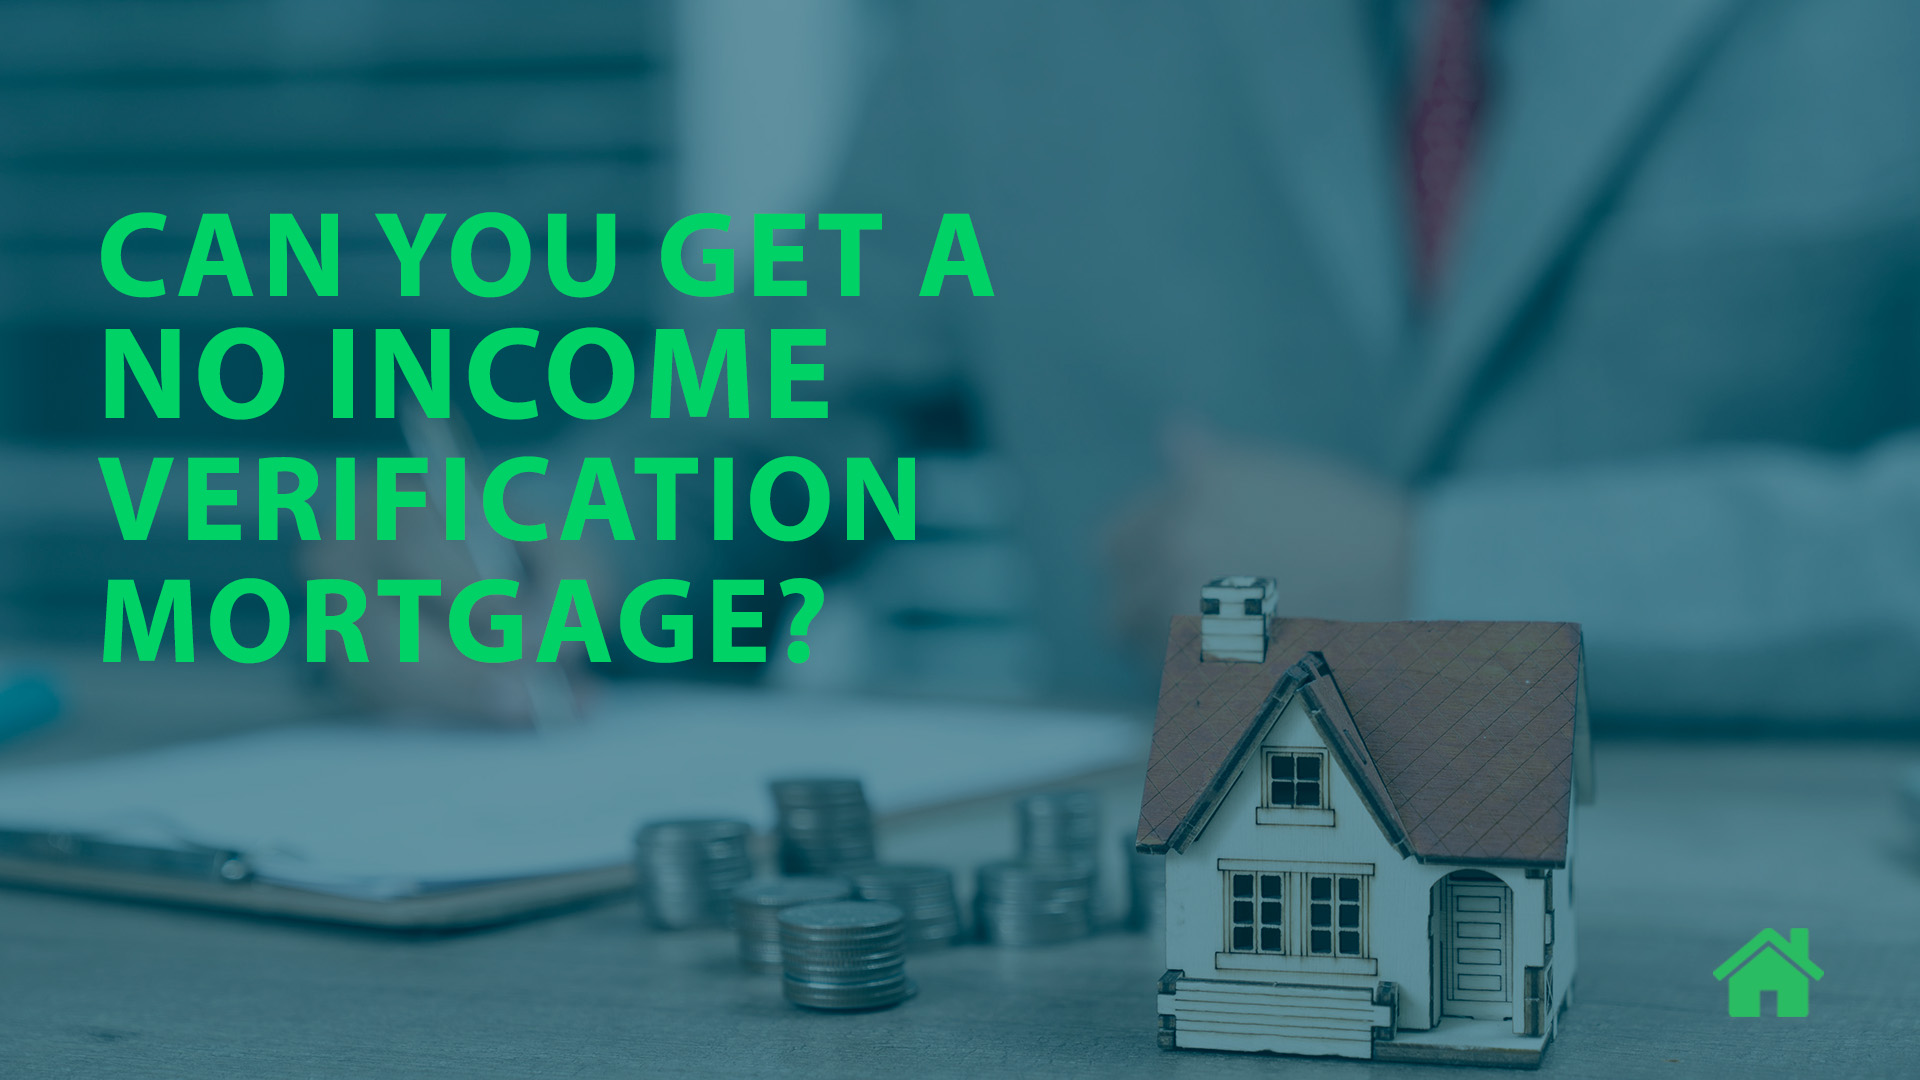 Can You Get a No Income Verification Mortgage